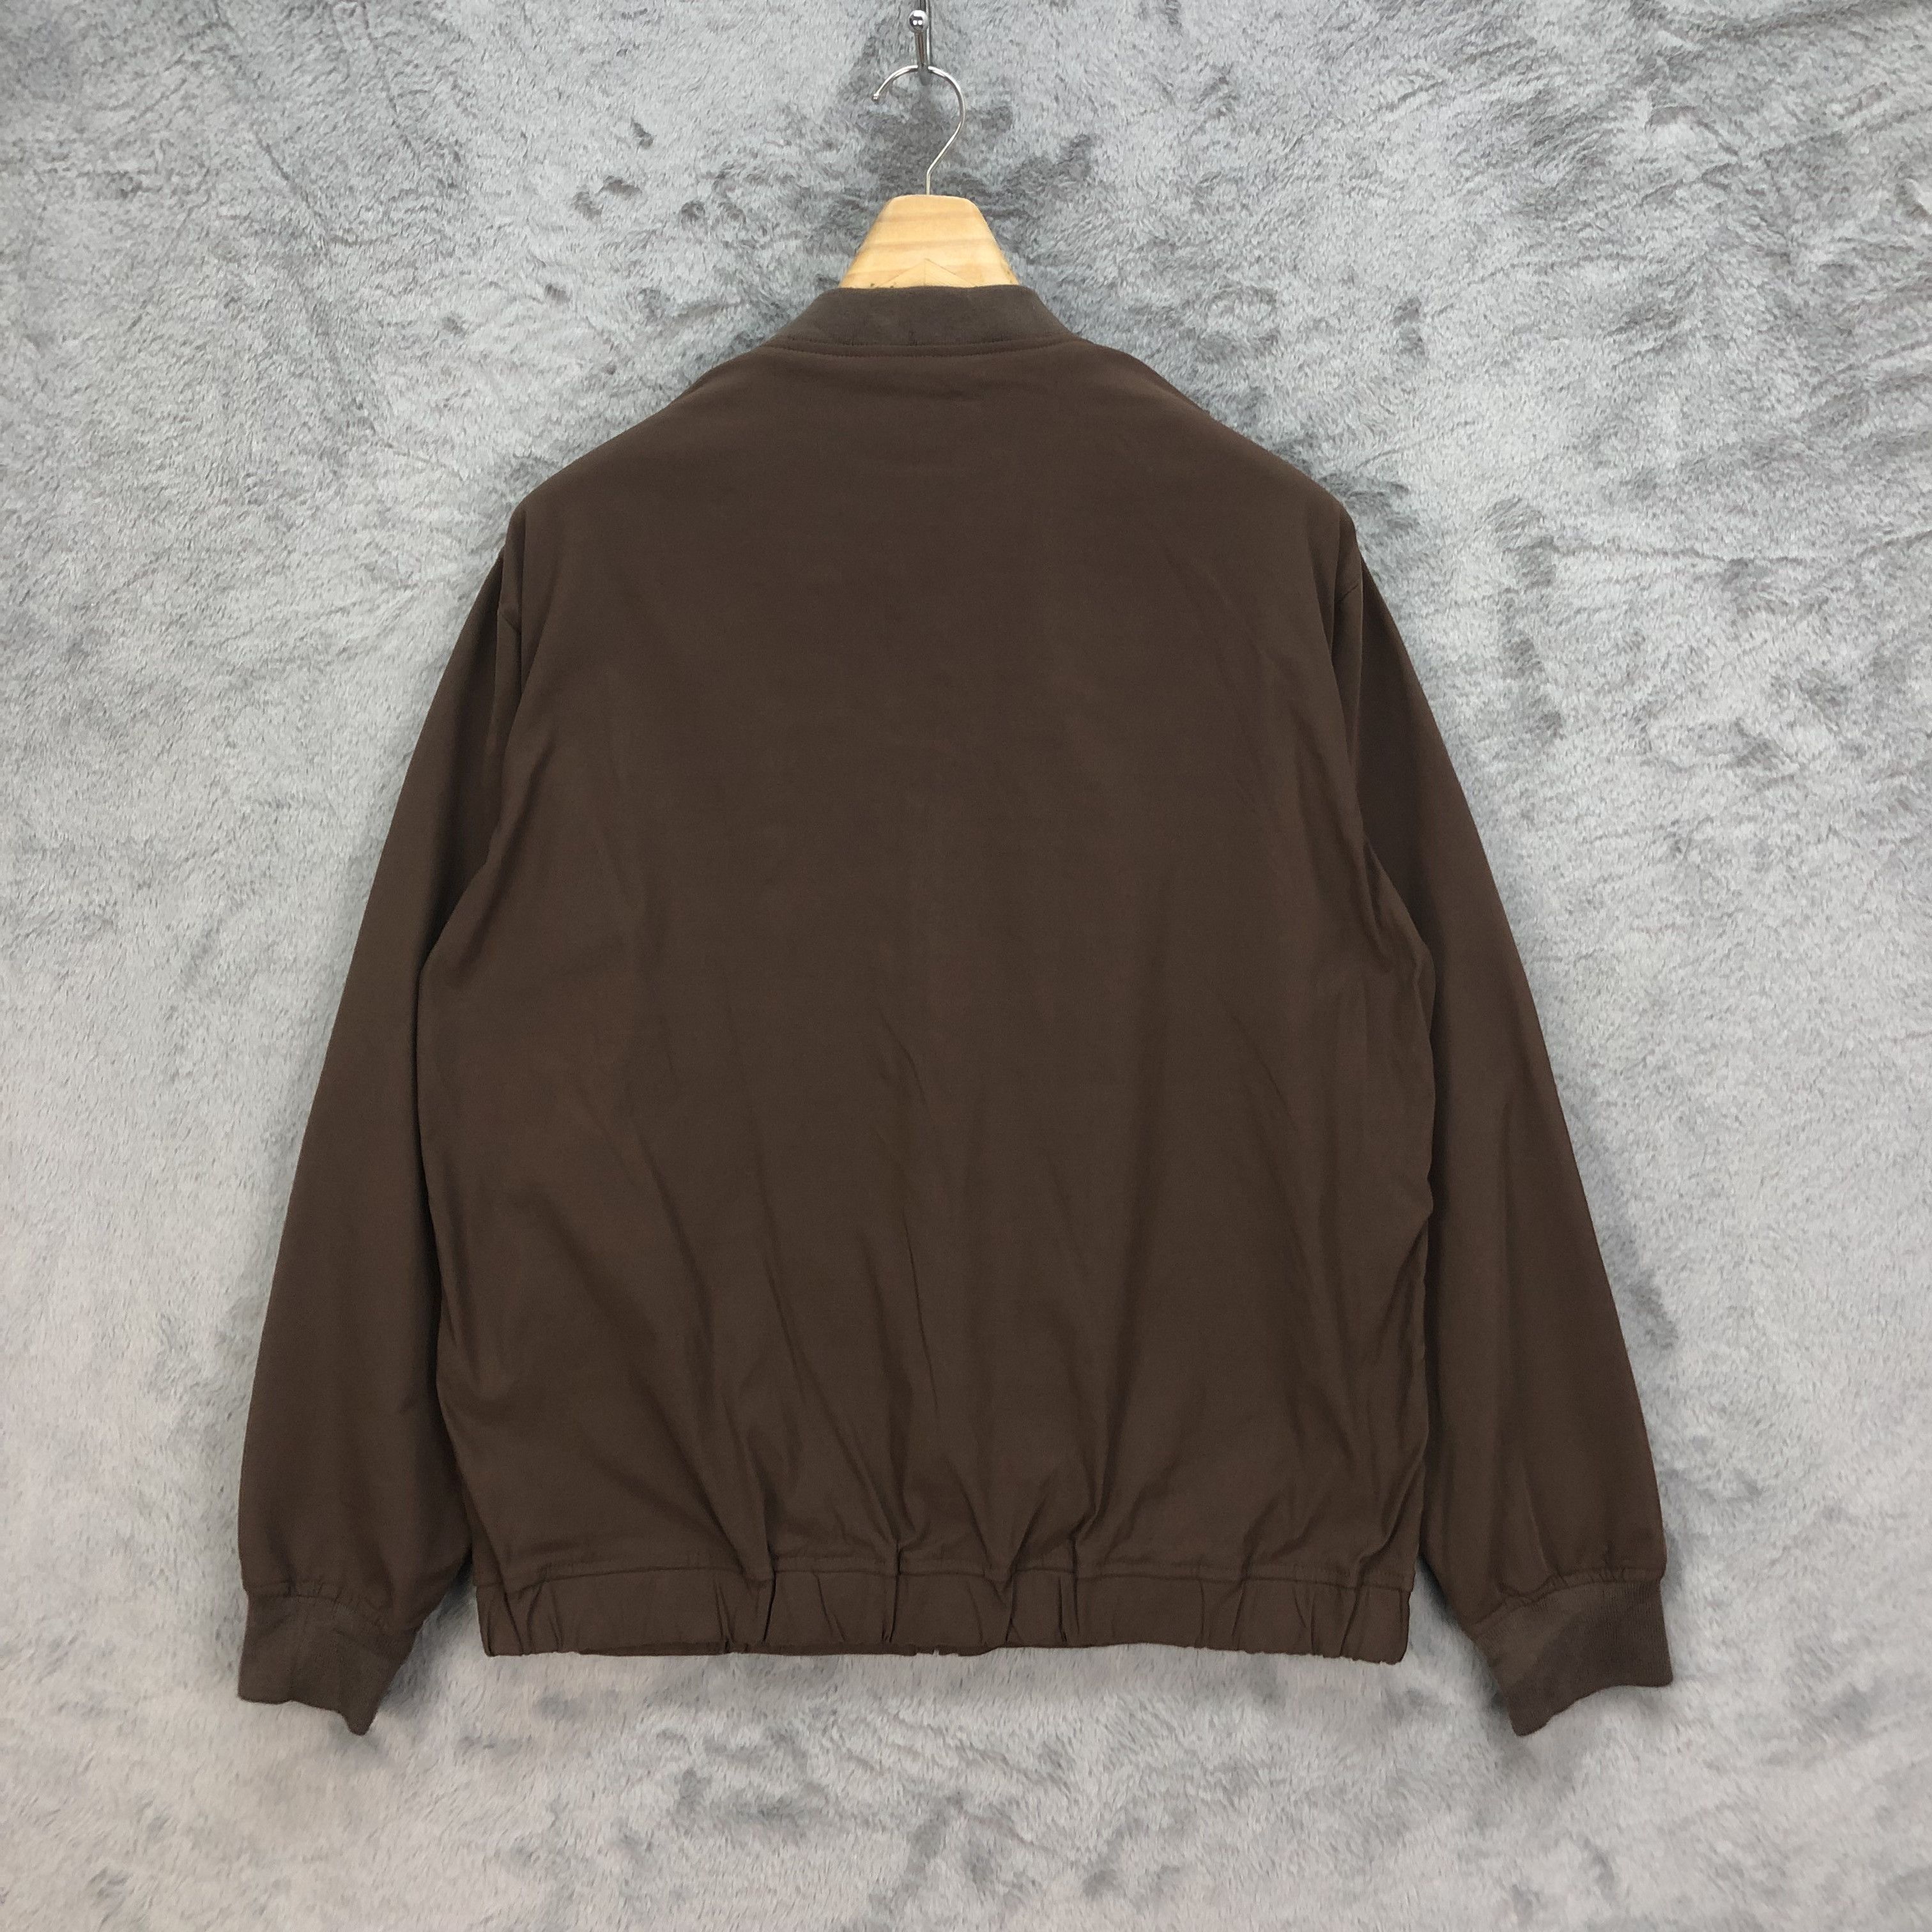 GREEN LABEL RELAXING United Arrows All Brown Bomber 5167-177 - 10